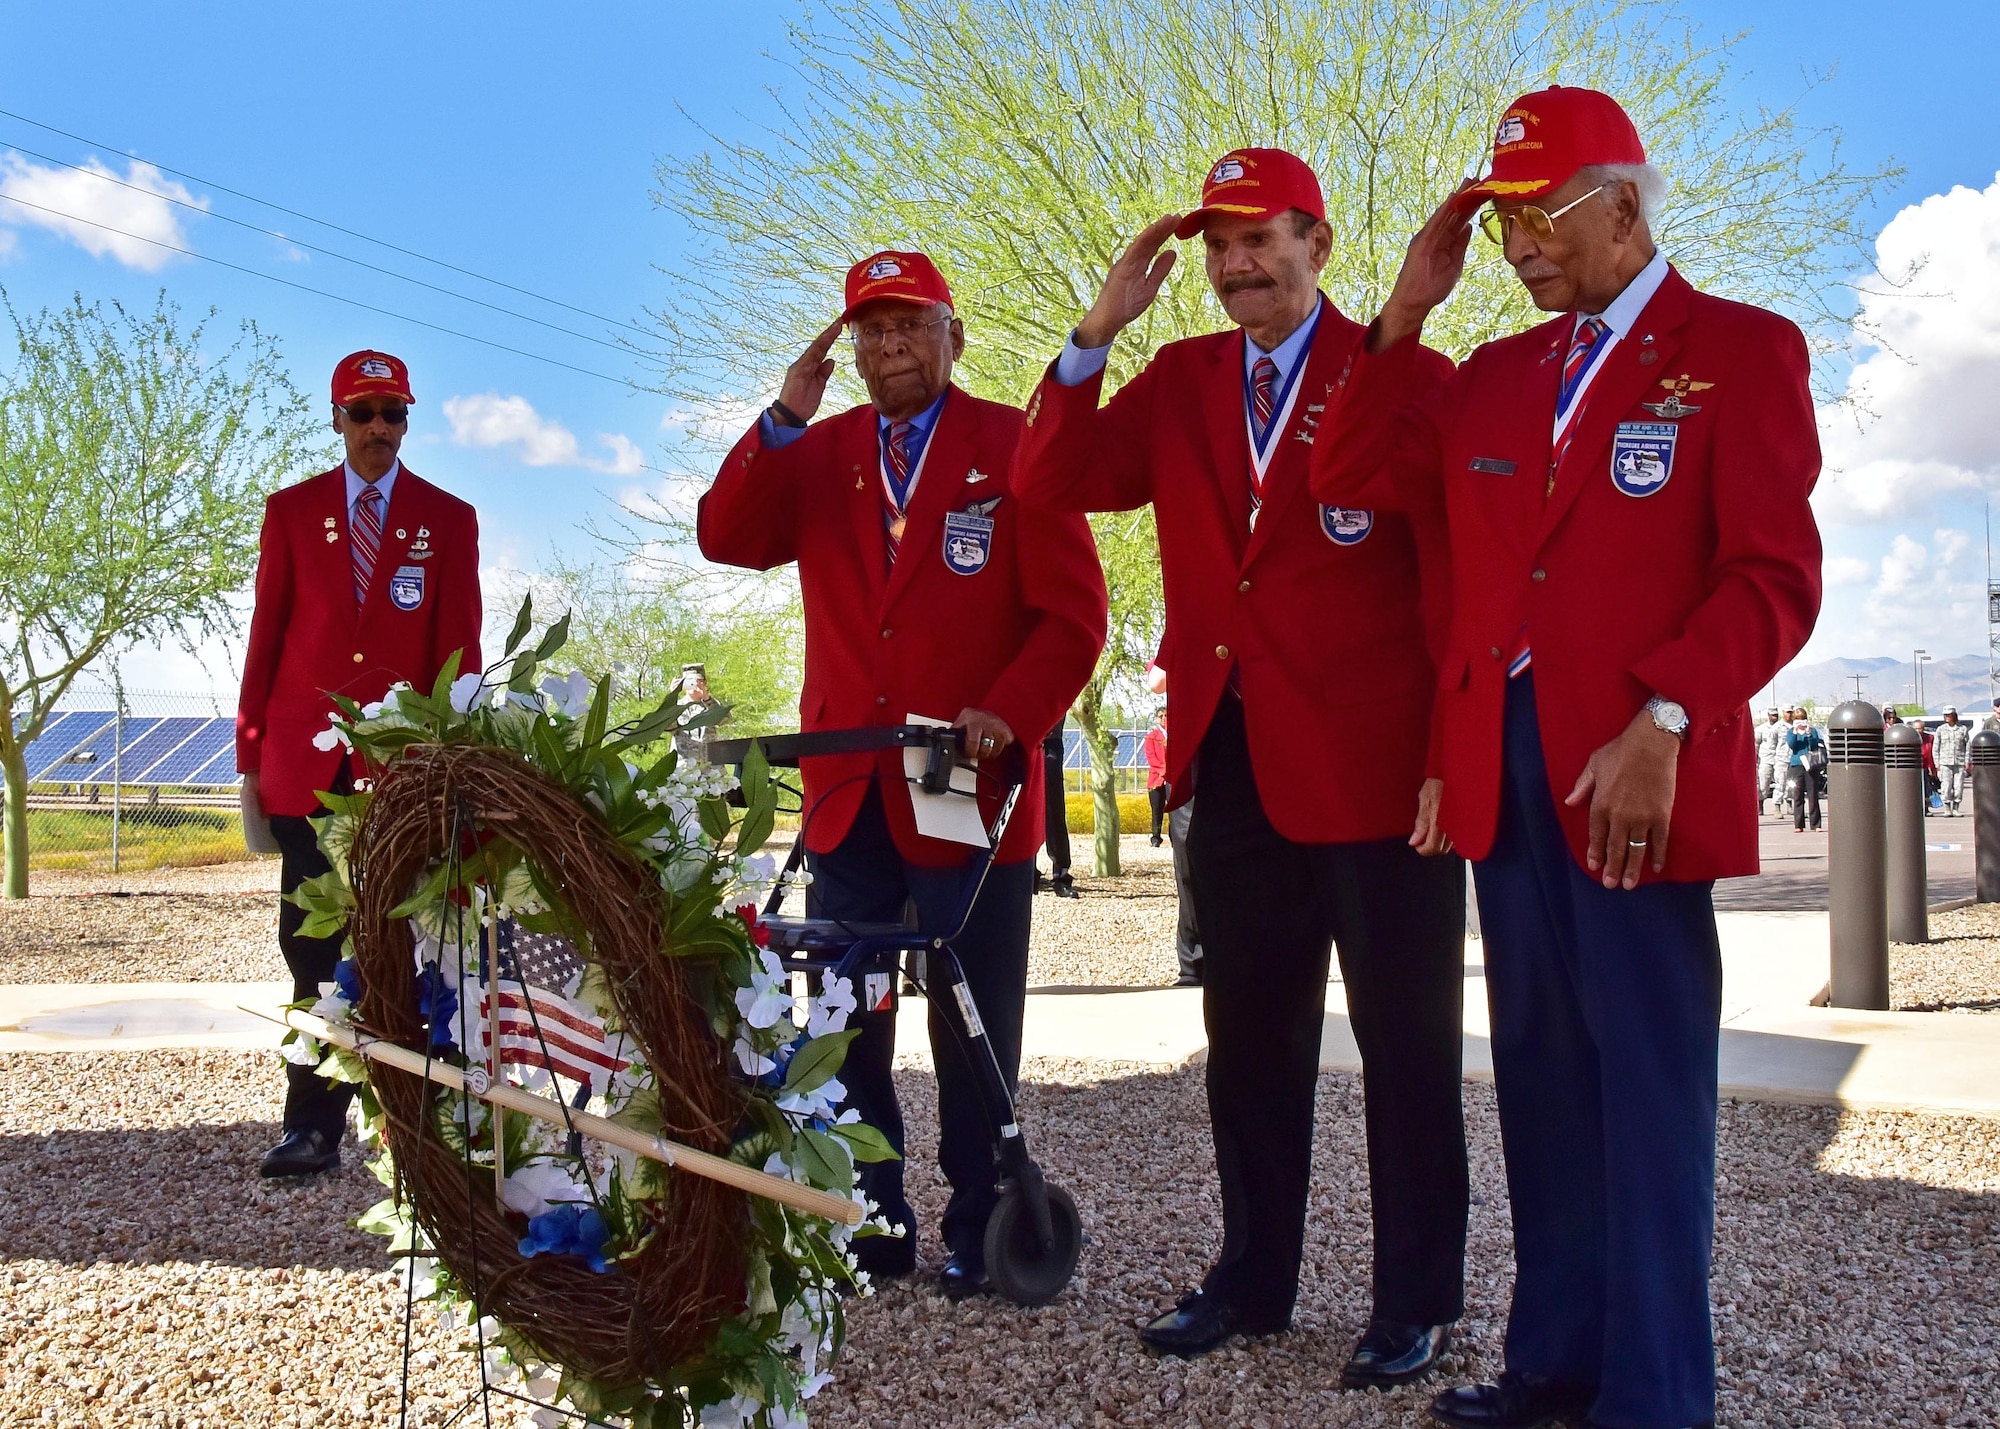 (Ret.) Lt. Col. Asa Herring, (Ret.) Tech. Sgt. Rudolf Silas, and (Ret.) Lt. Col. Robert Ashby, three of the original Tuskegee Airmen, render a salute Mar. 23 during the fourth annual Commemoration Day for the Tuskegee Airmen in Arizona at Luke Air Force Base, Ariz. (U.S. Air Force photo by Tech. Sgt. Louis Vega Jr.)